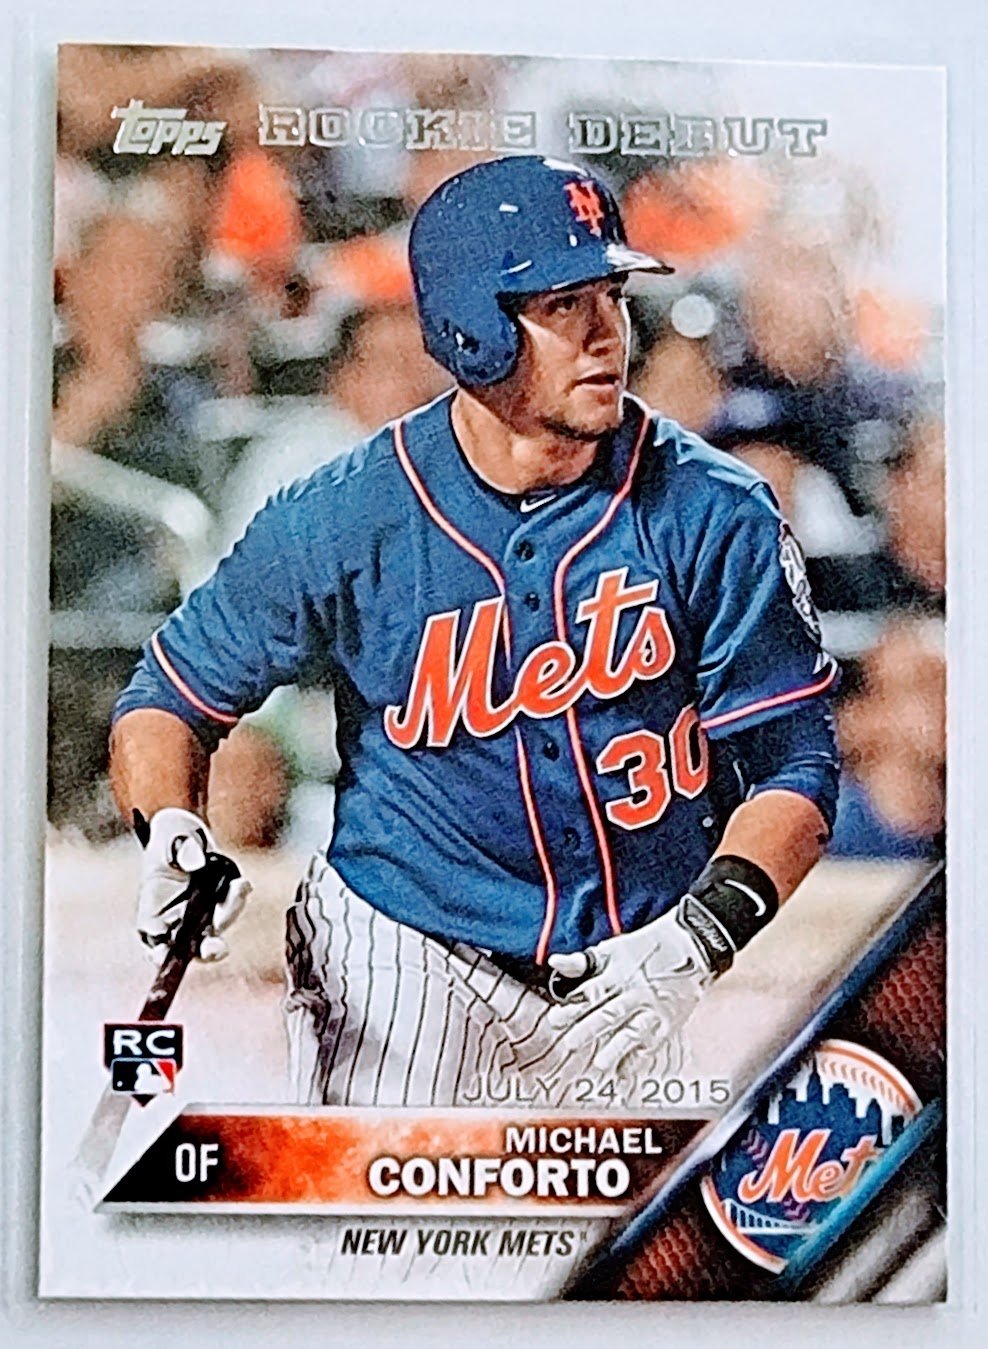 2016 Topps Michael Conforto Rookie Baseball Card TPTV simple Xclusive Collectibles   